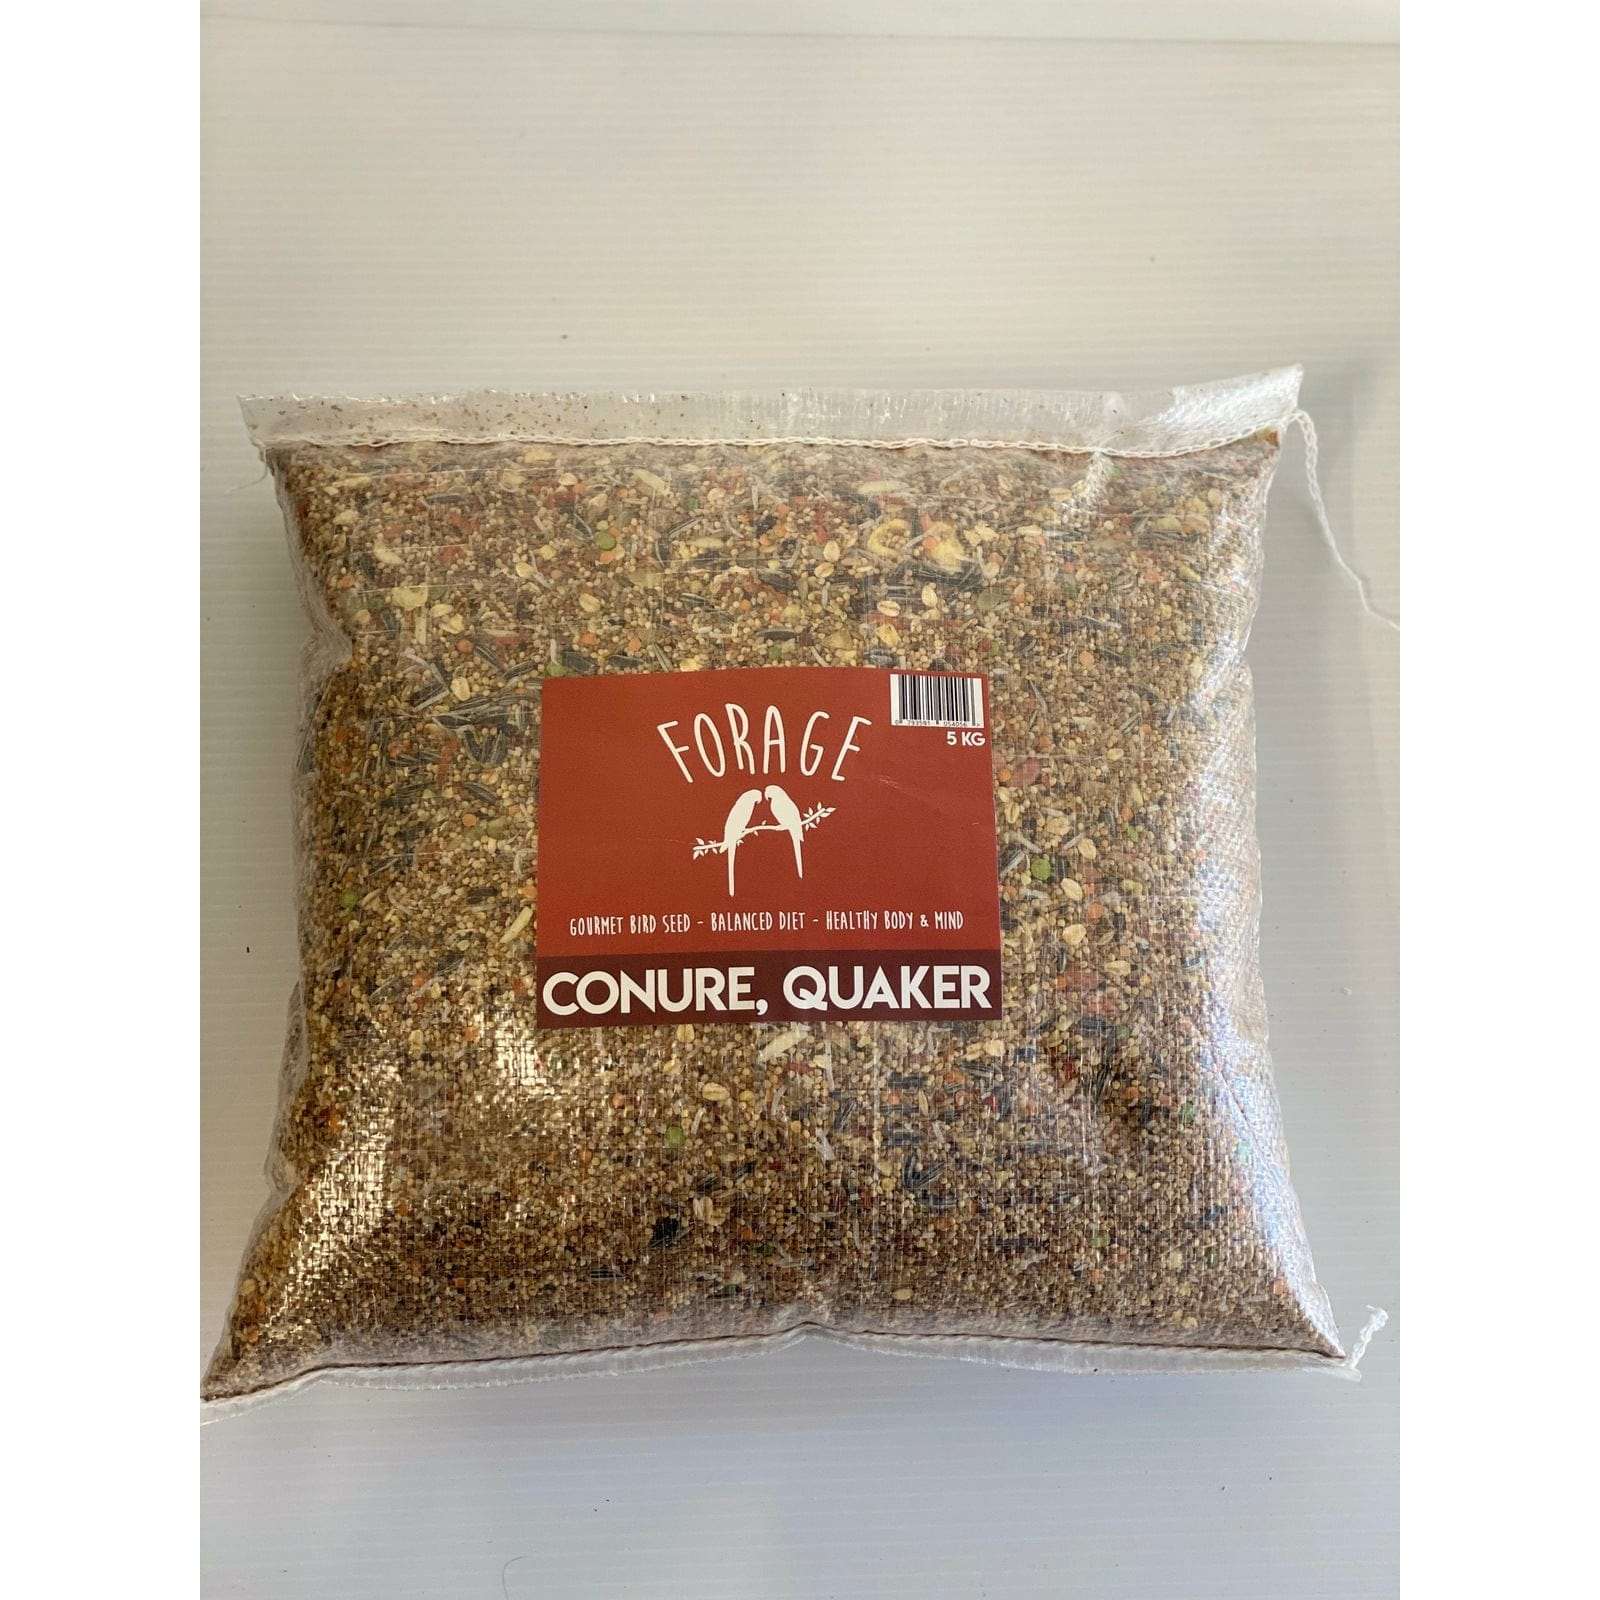 Forage Conure & Quaker Mix (Excl. TAS & WA) from Forage Gourmet Seed